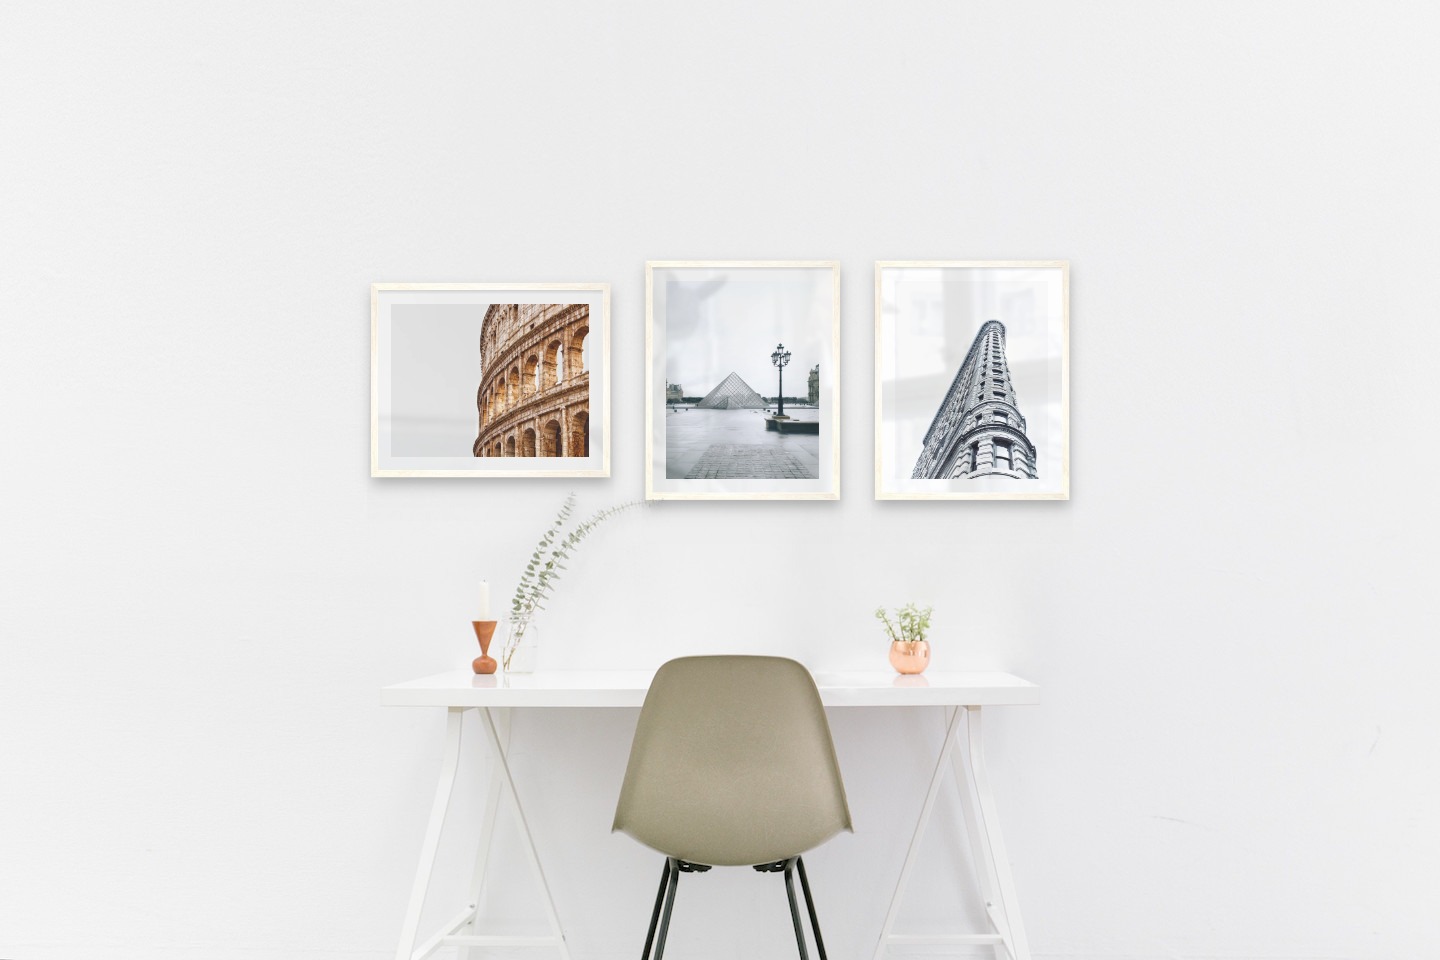 Gallery wall with picture frames in light wood in sizes 40x50 with prints "Colosseum and Rome", "Louvre in Paris" and "Gray building"